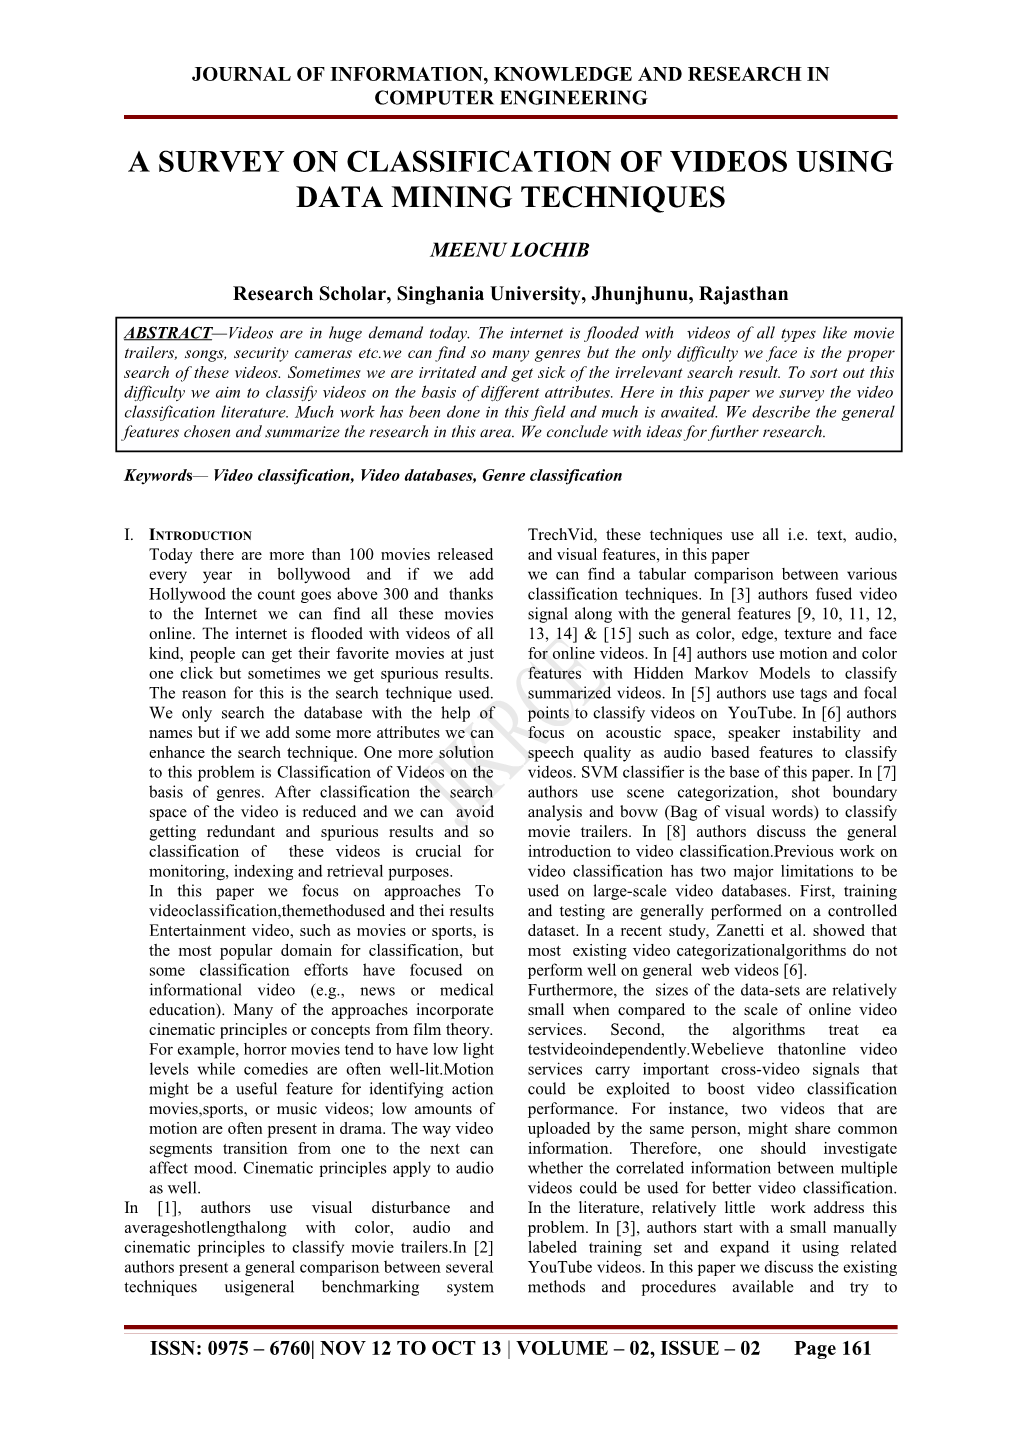 IEEE Paper Template in A4 (V1) s1